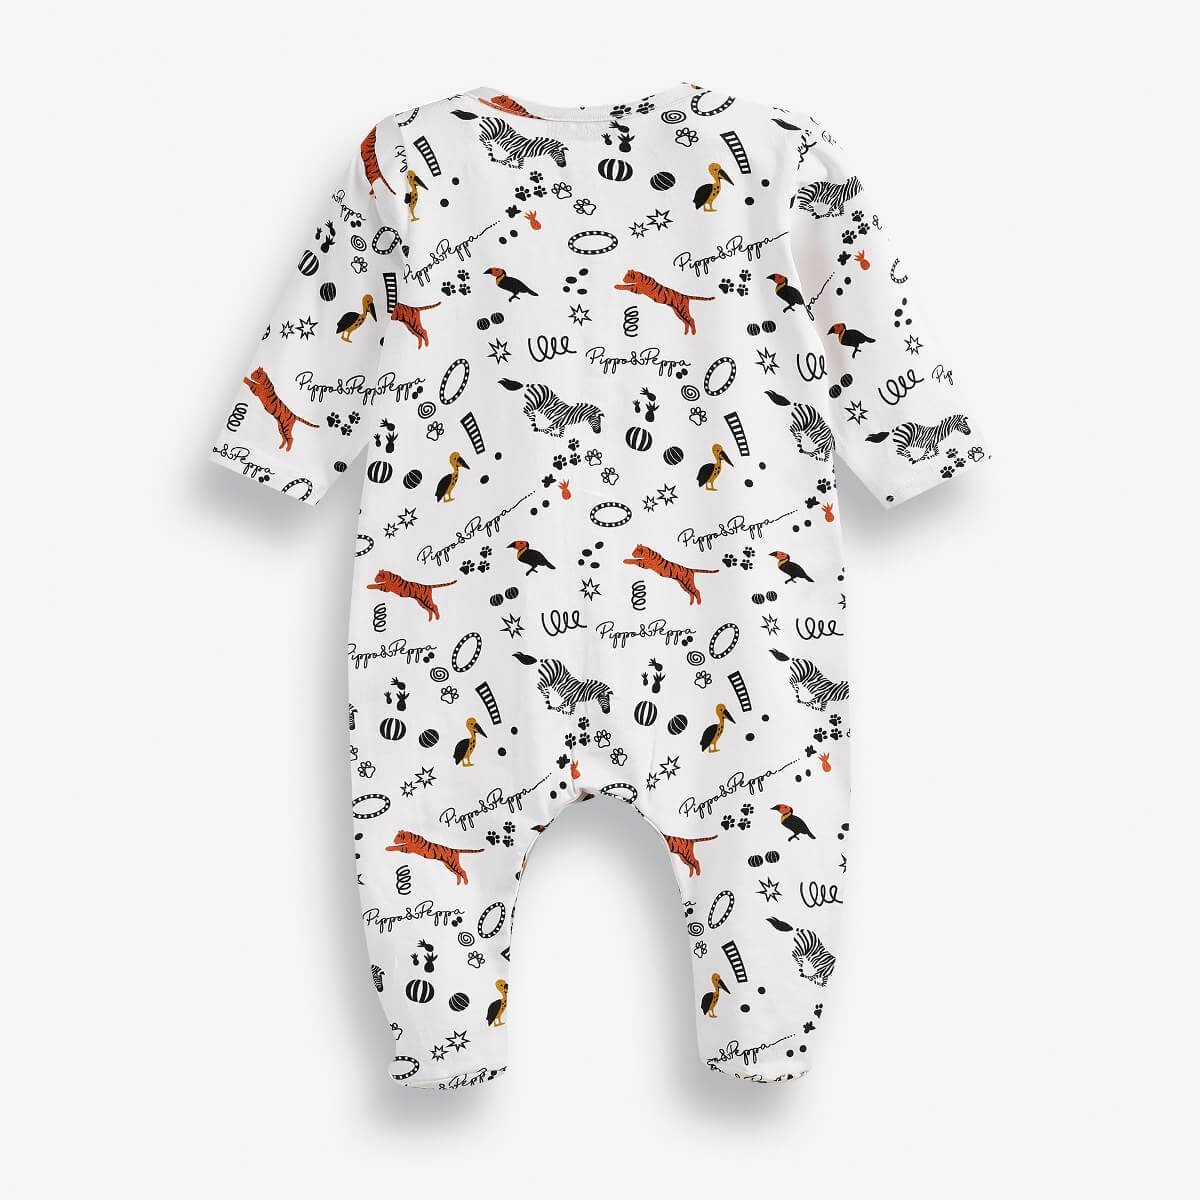 Baby Boys' Jumpsuit with a Closed Leg Finish